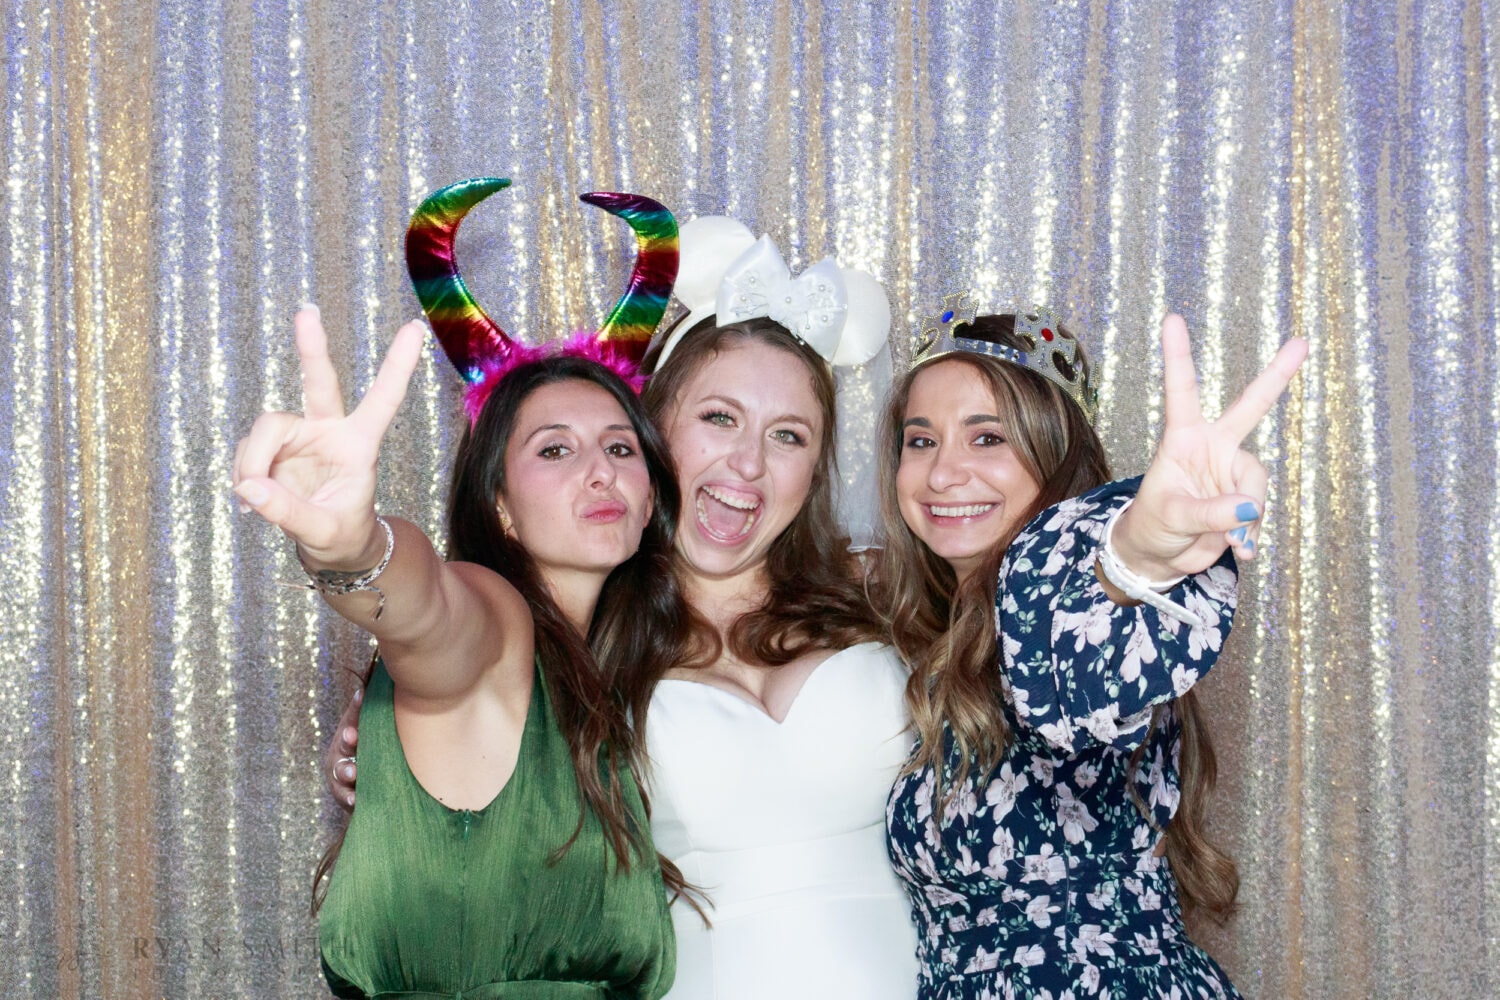 Fun photo booth pictures with the gold background - The Venue at White Oaks Farm